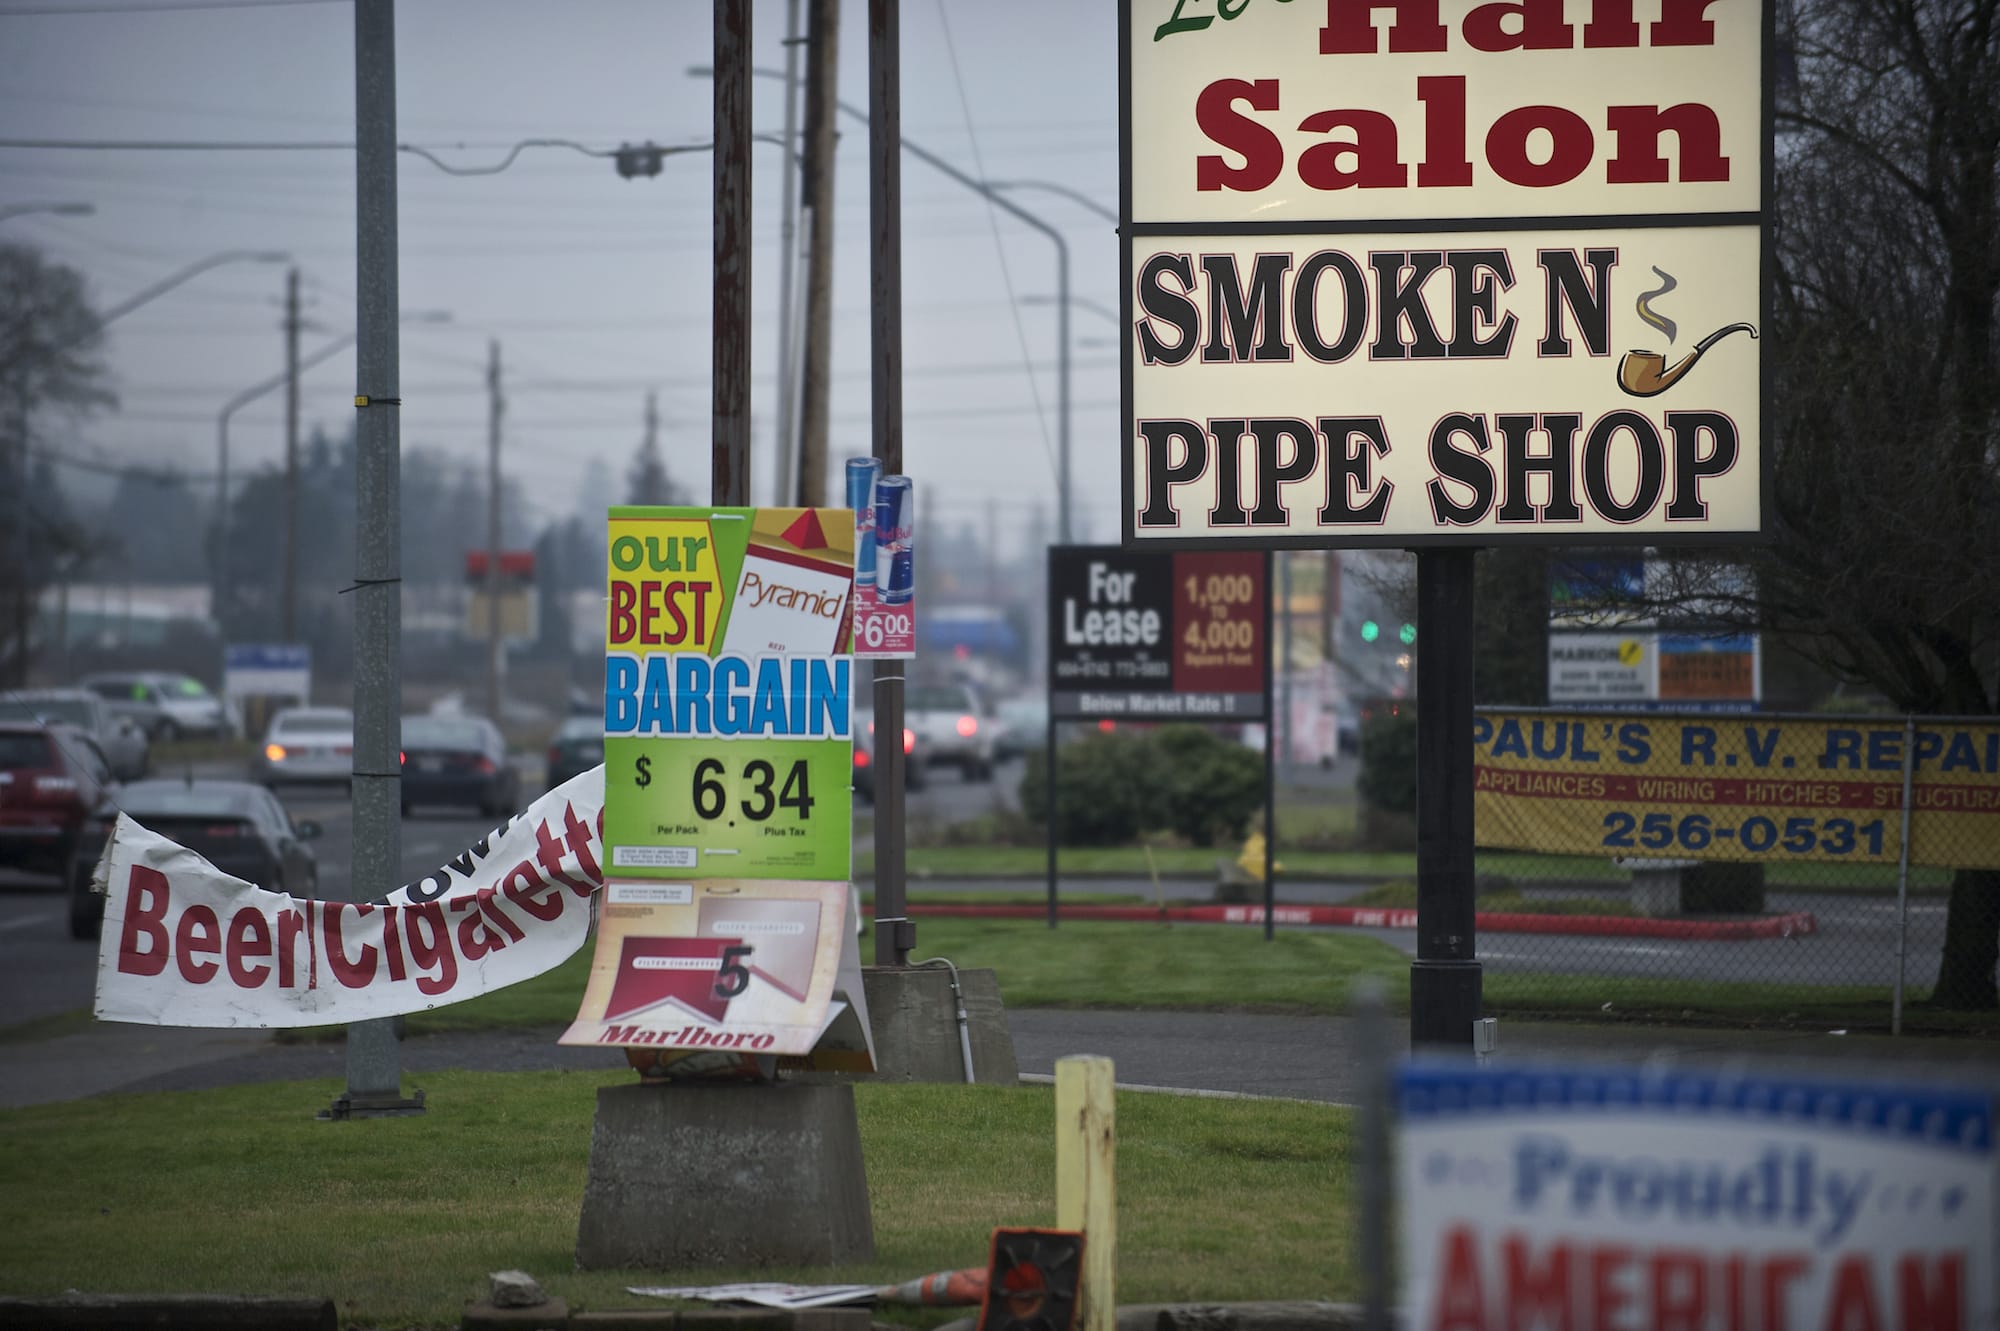 Smoke 'N' Pipe shop is one of several marijuana pipe and paraphernalia stores in Orchards.